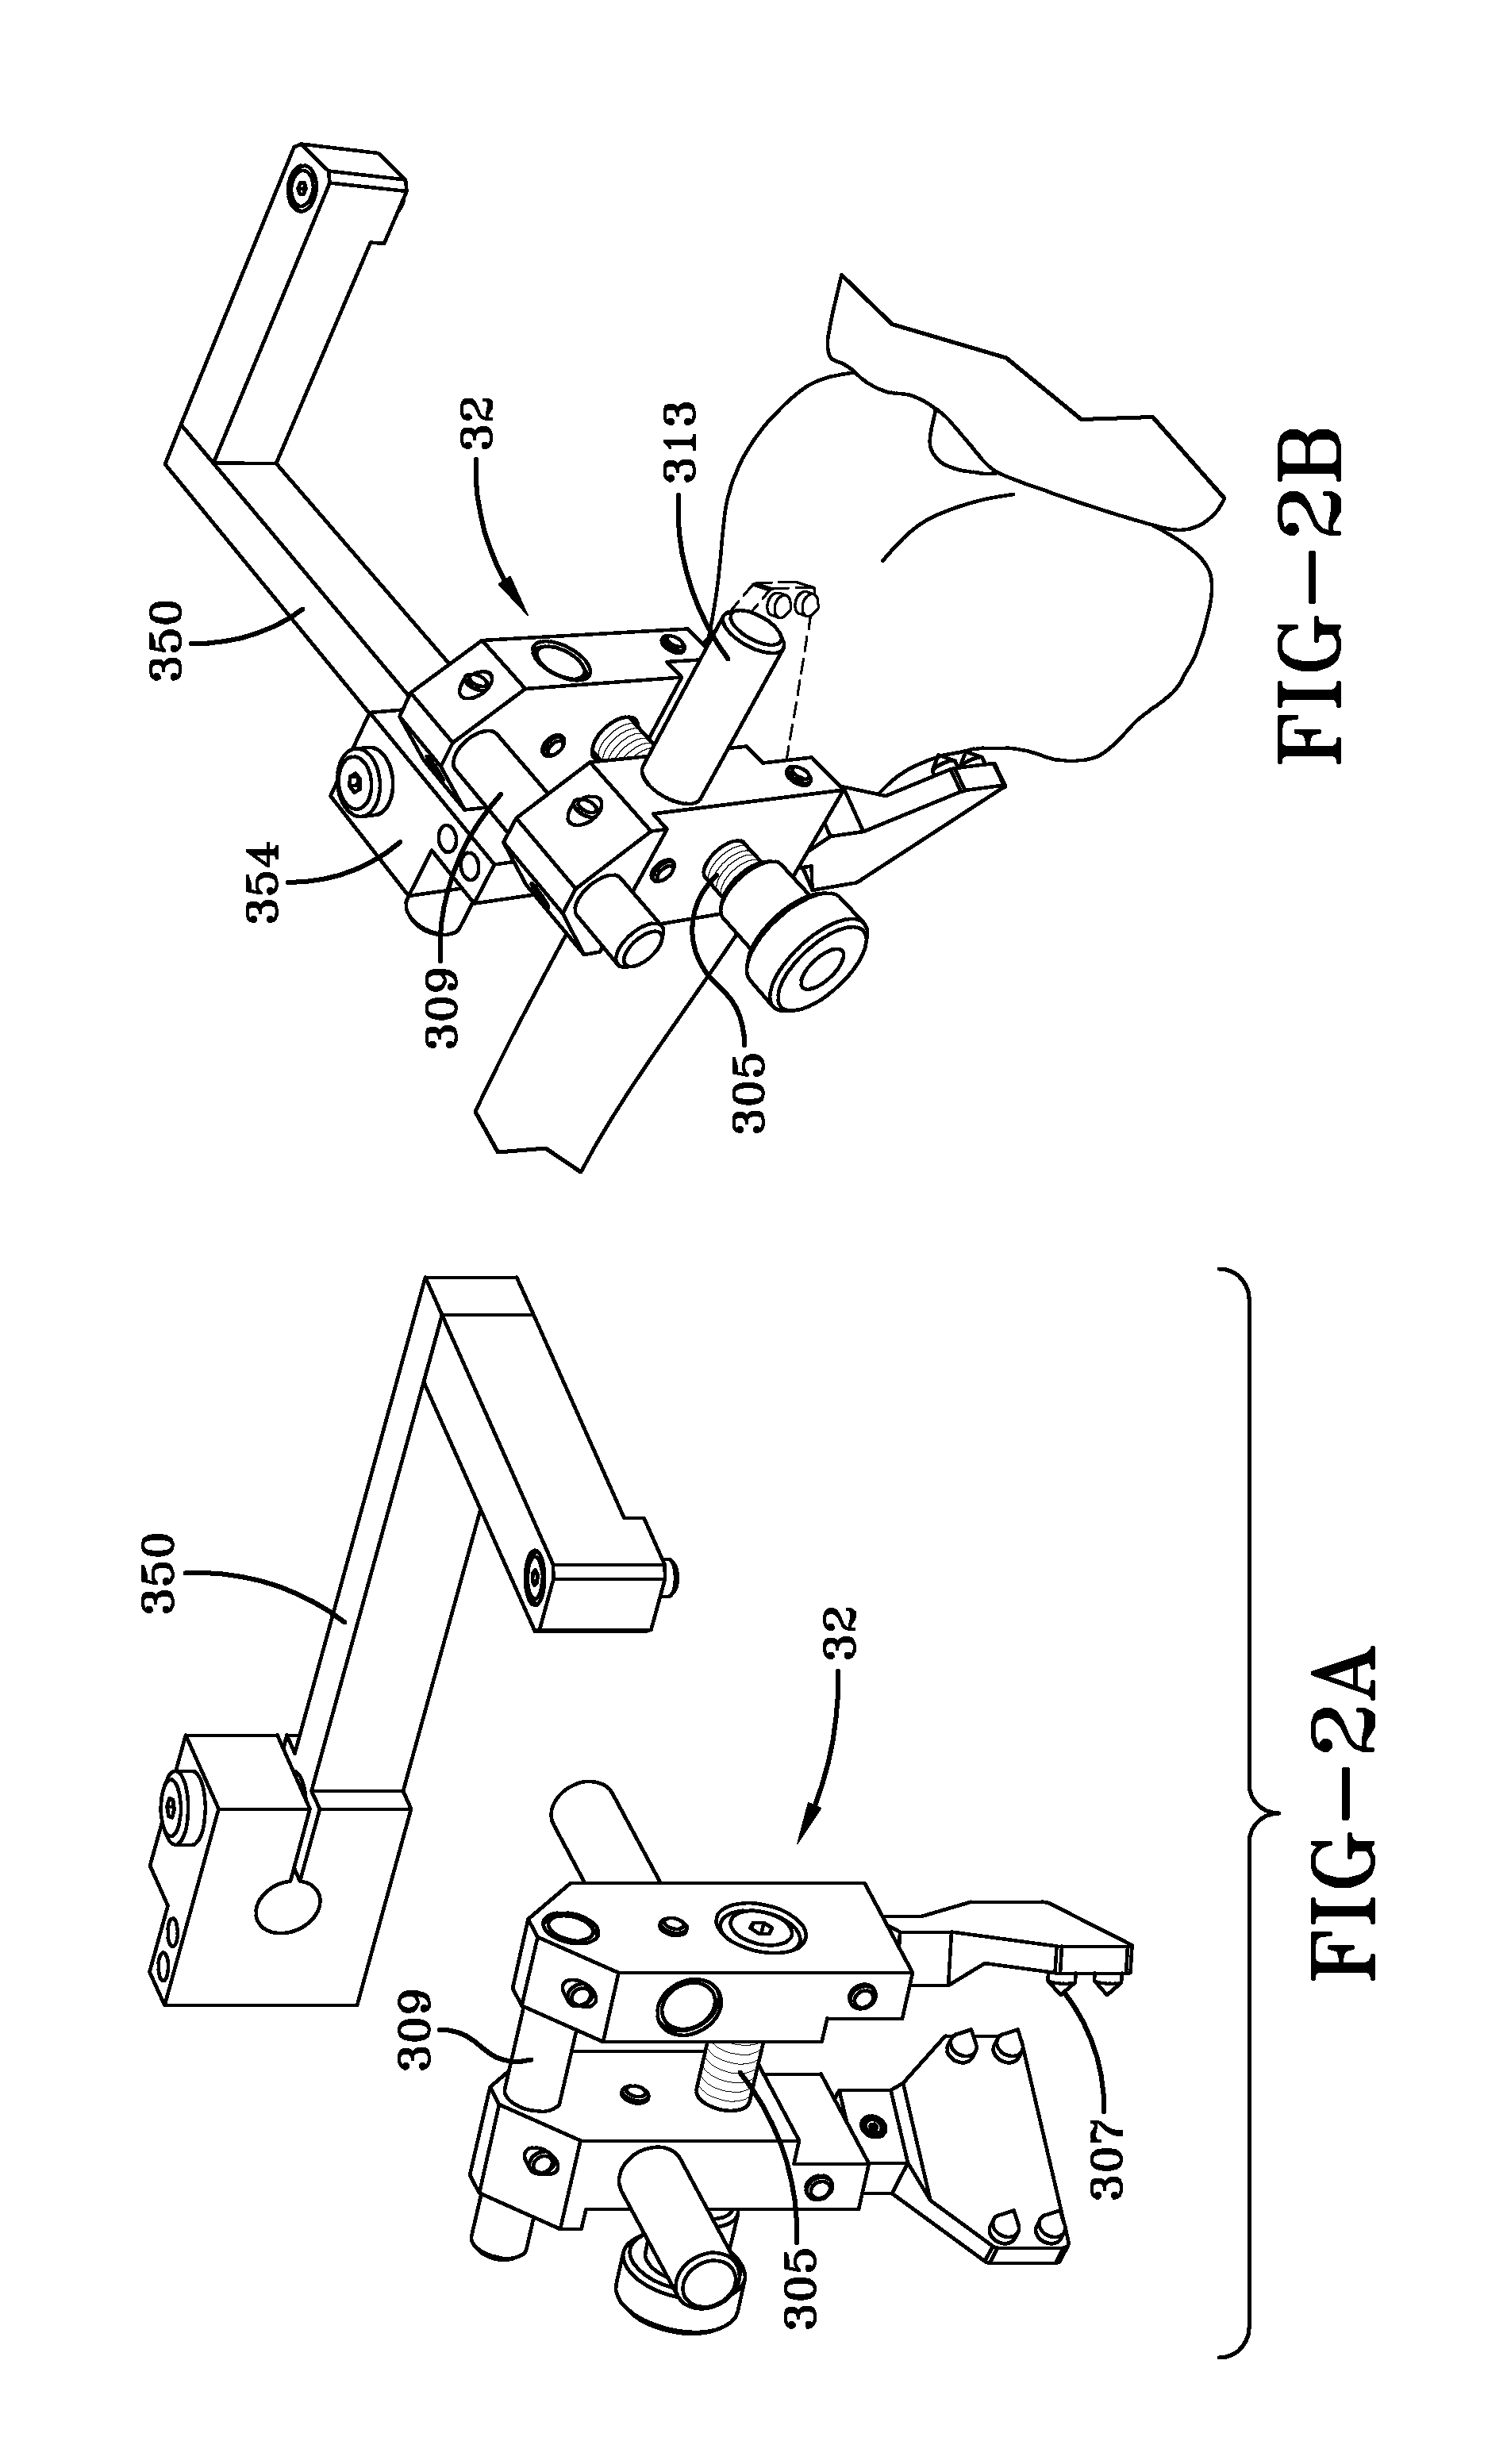 Joint stability arrangement and method